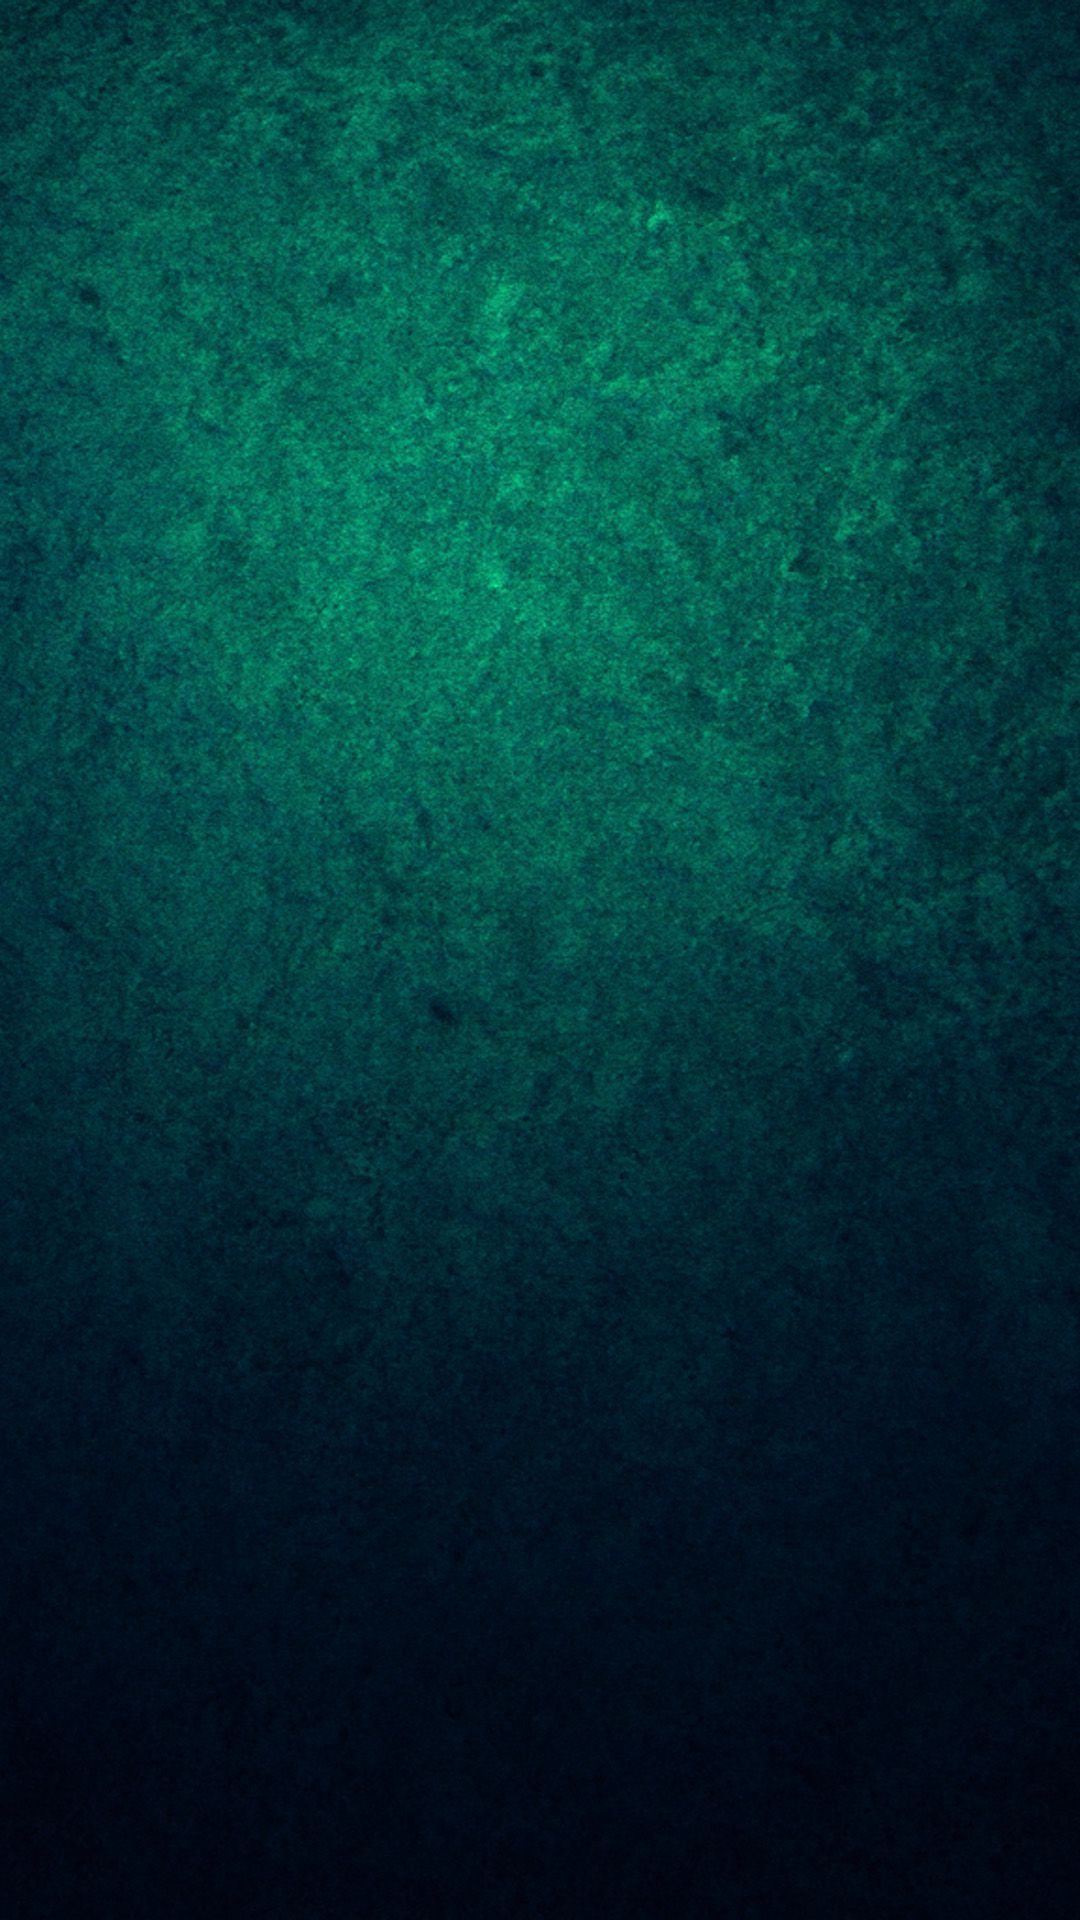 Elegant Green And Gold Wallpaper Android Download. Dark teal iphone wallpaper, Gold wallpaper android, Abstract iphone wallpaper